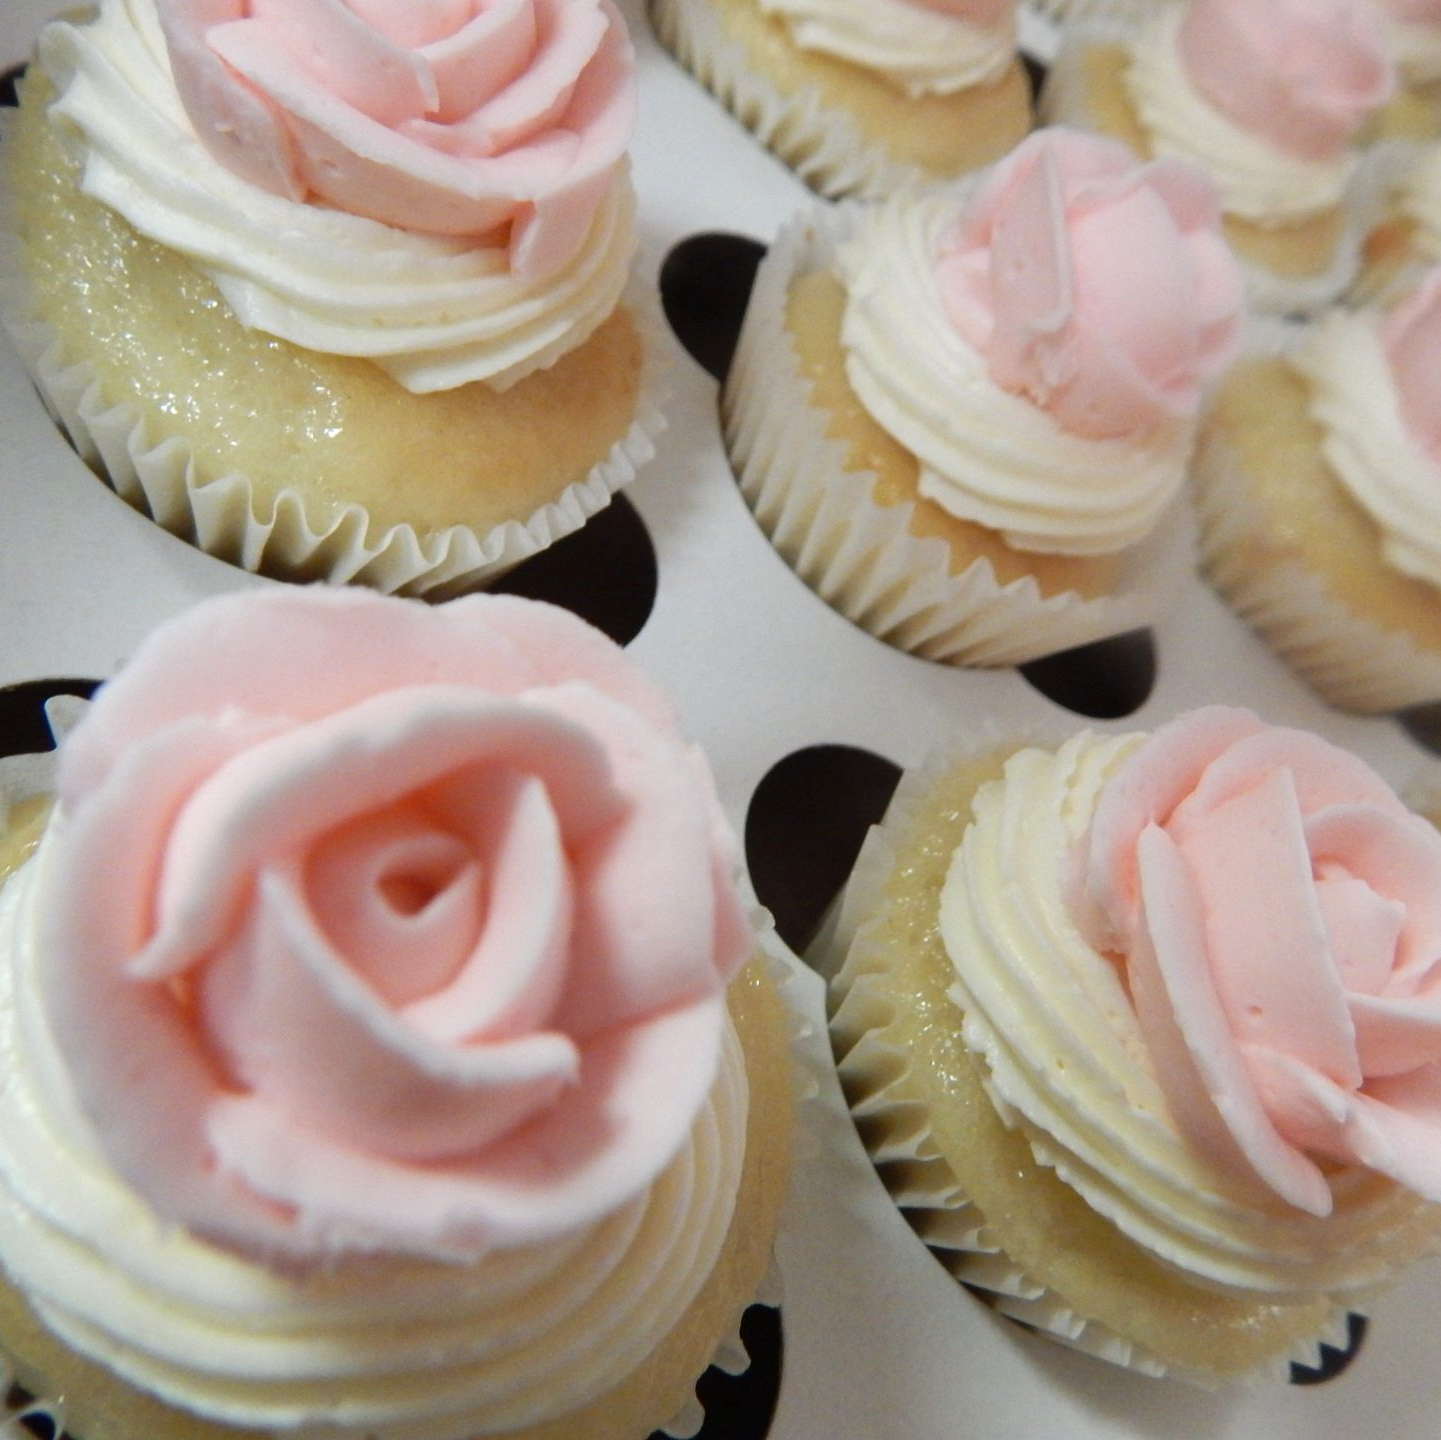 Cupcakes topped with white and pink icing roses